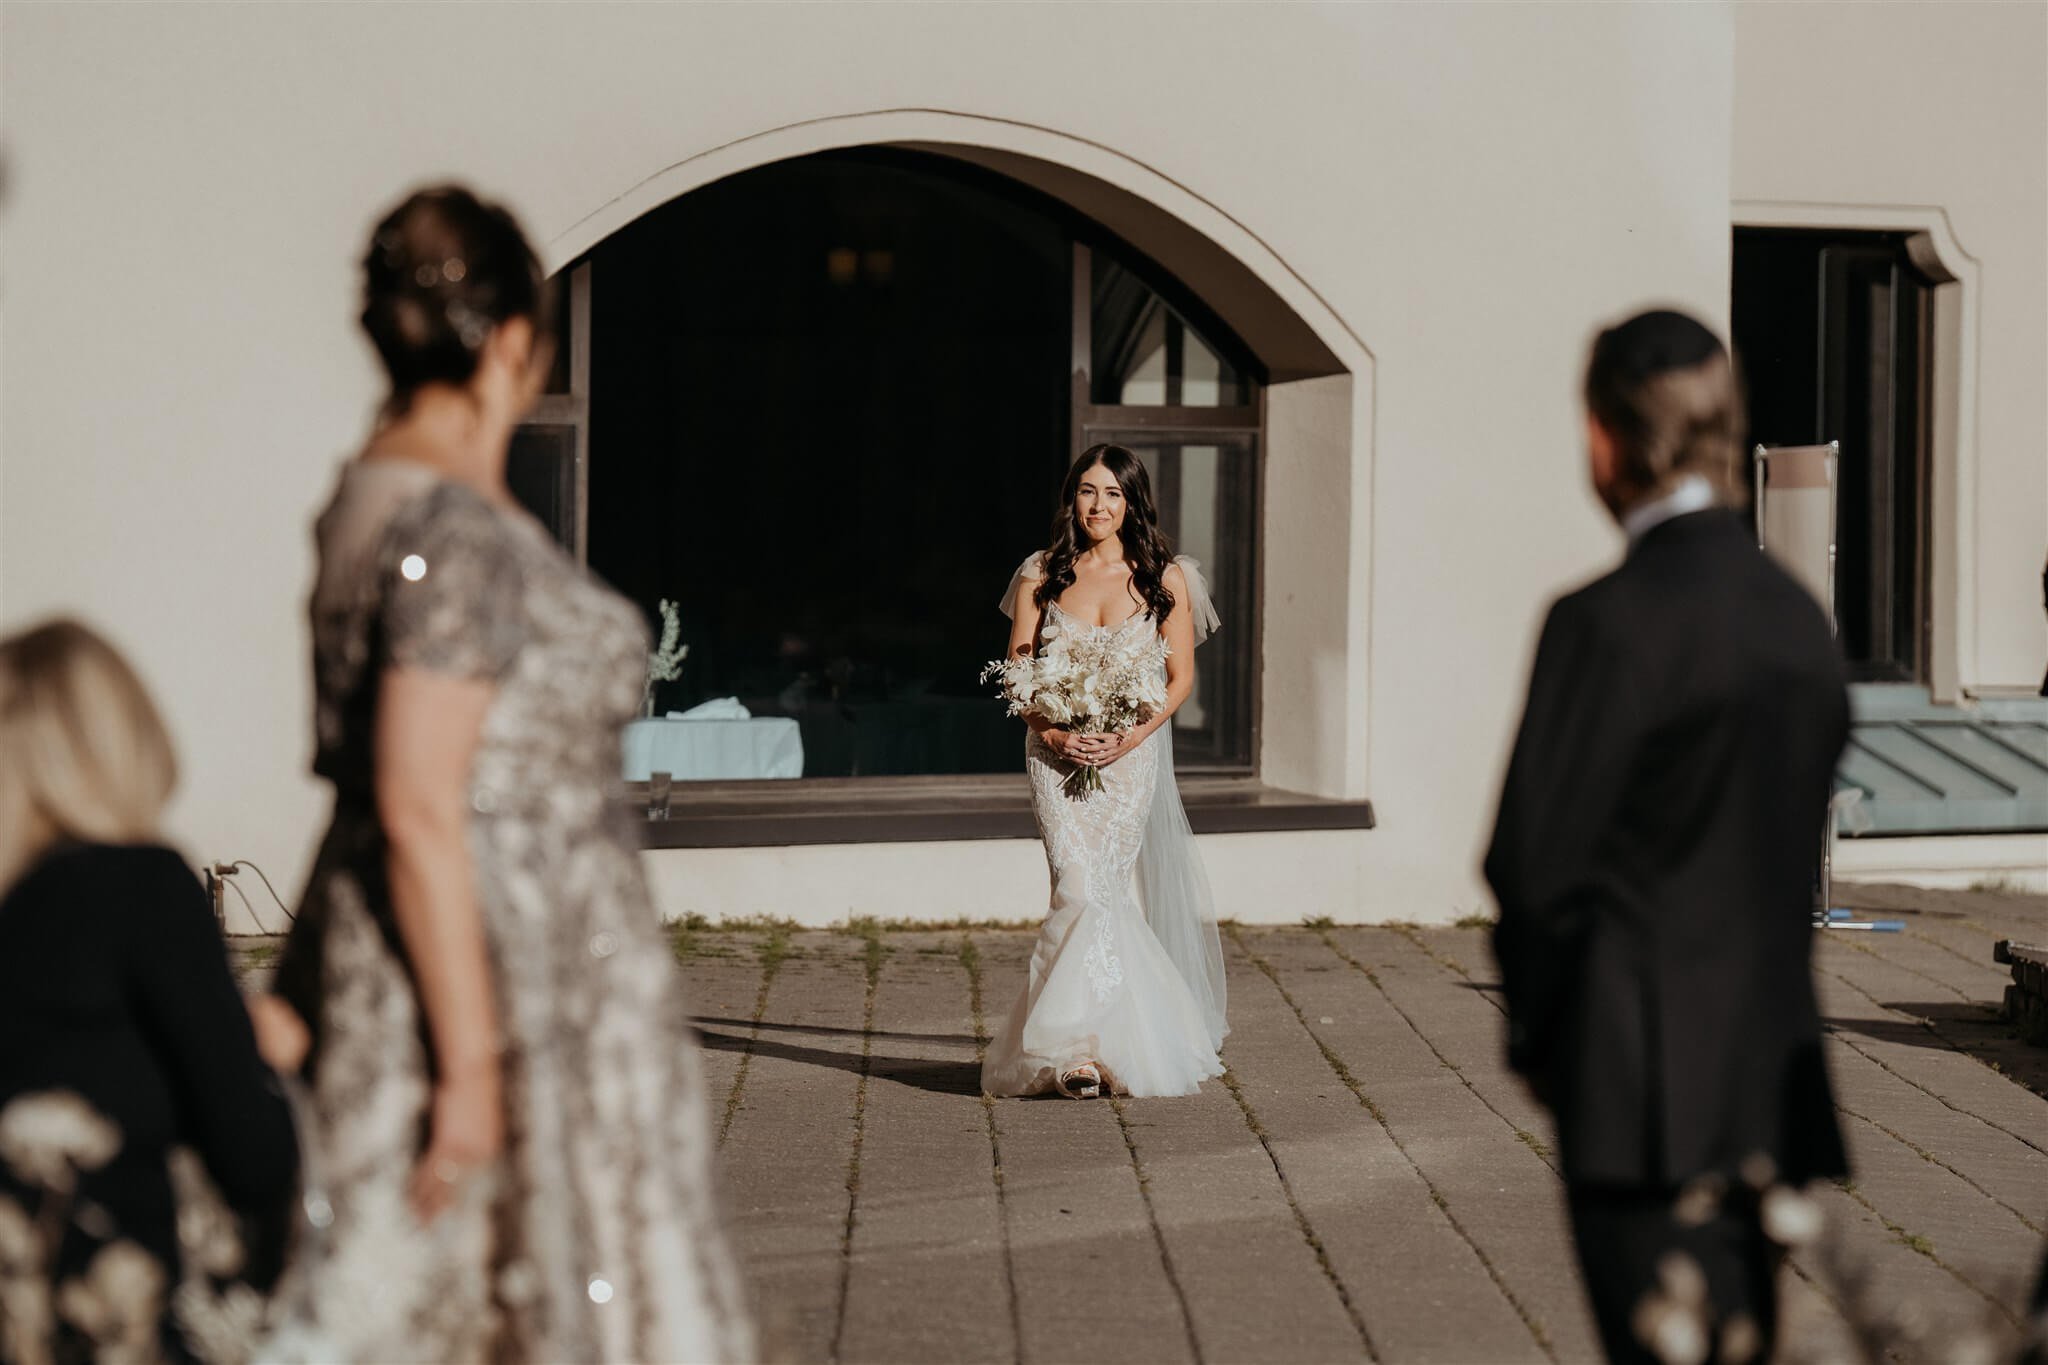 Bride enters outdoor wedding ceremony with white and gold wedding decorations